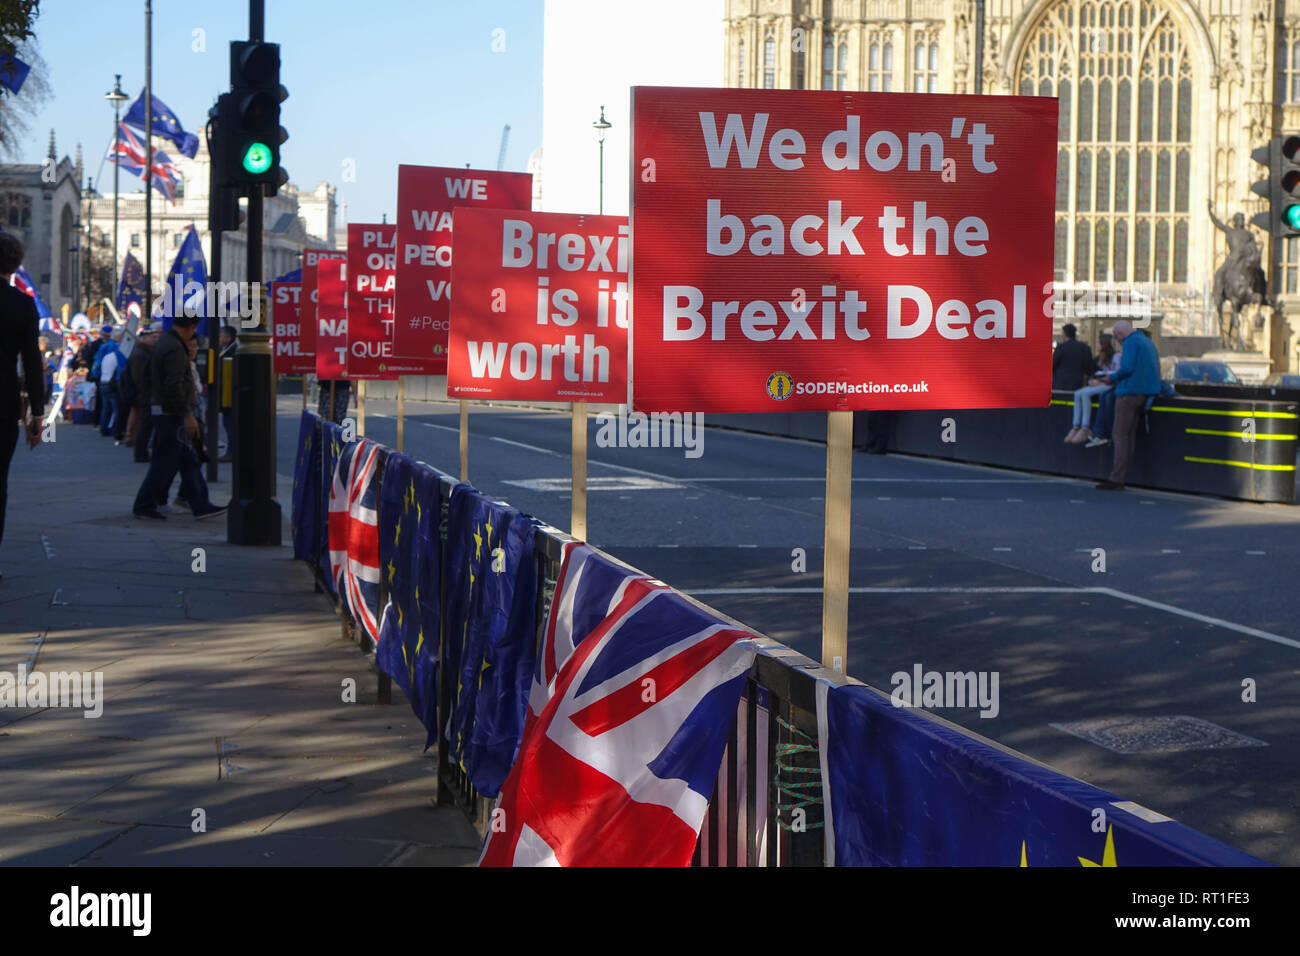 Anti-Brexit Activist demonstrate opposite Palace Of Westminster in London. Credit: Thomas Krych/Alamy Live News Stock Photo